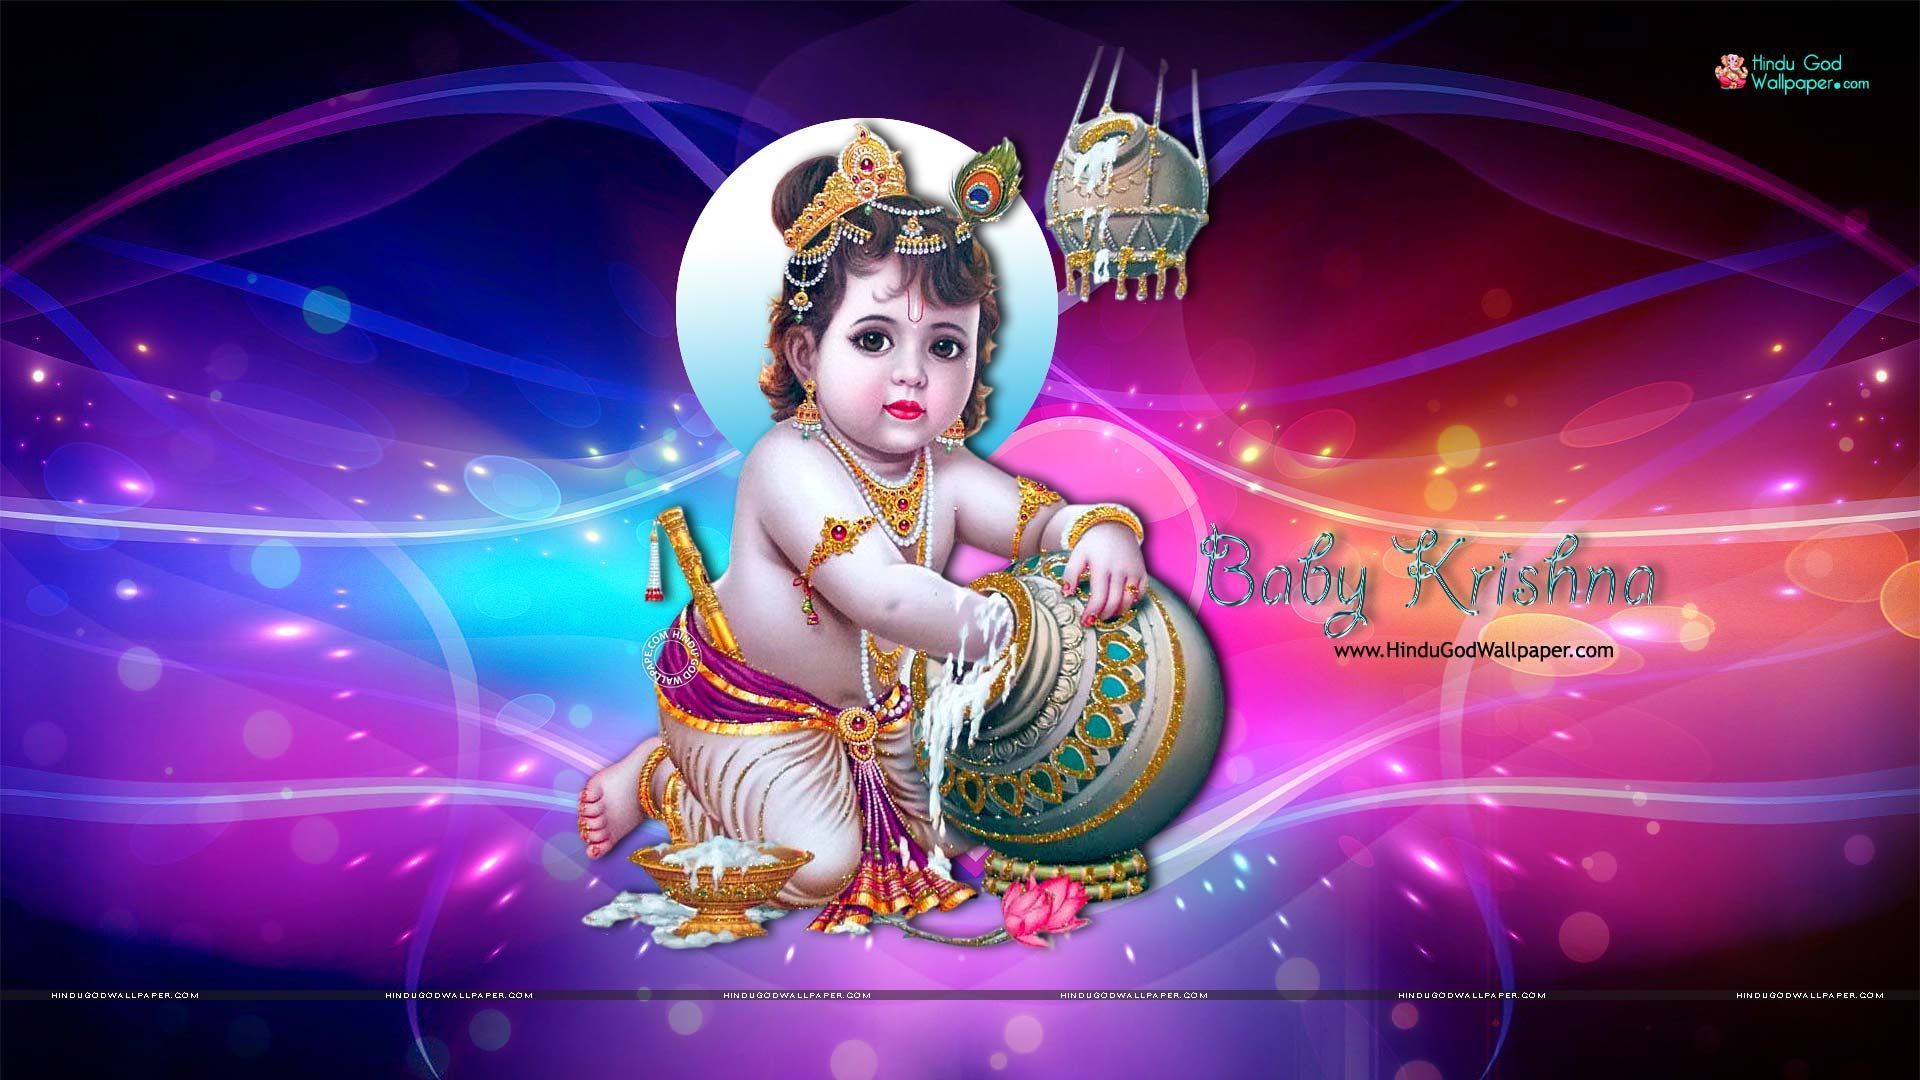 Baby Krishna HD Wallpaper free download with full size Lord Krishna HD Photo. Baby krishna, Lord krishna HD wallpaper, Lord krishna wallpaper